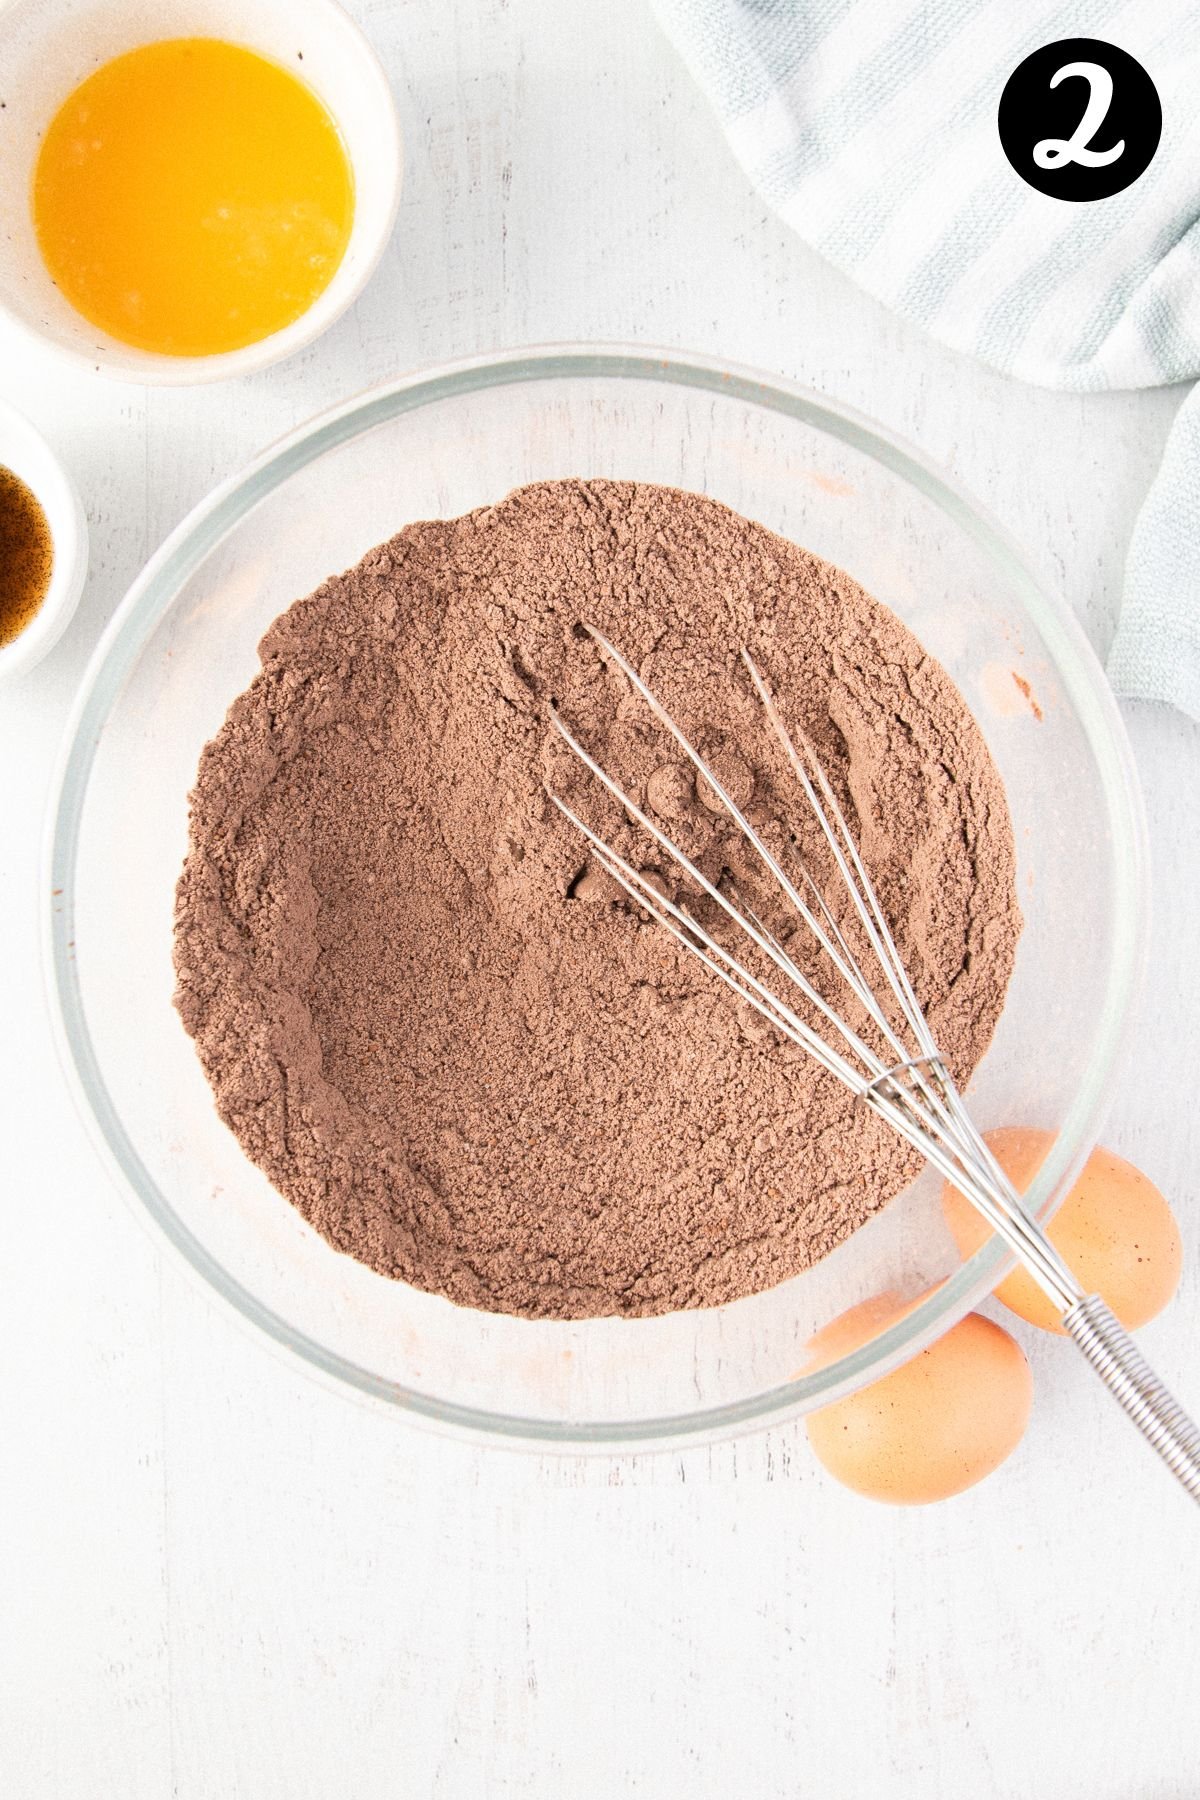 flour and cocoa mixture in a mixing bowl